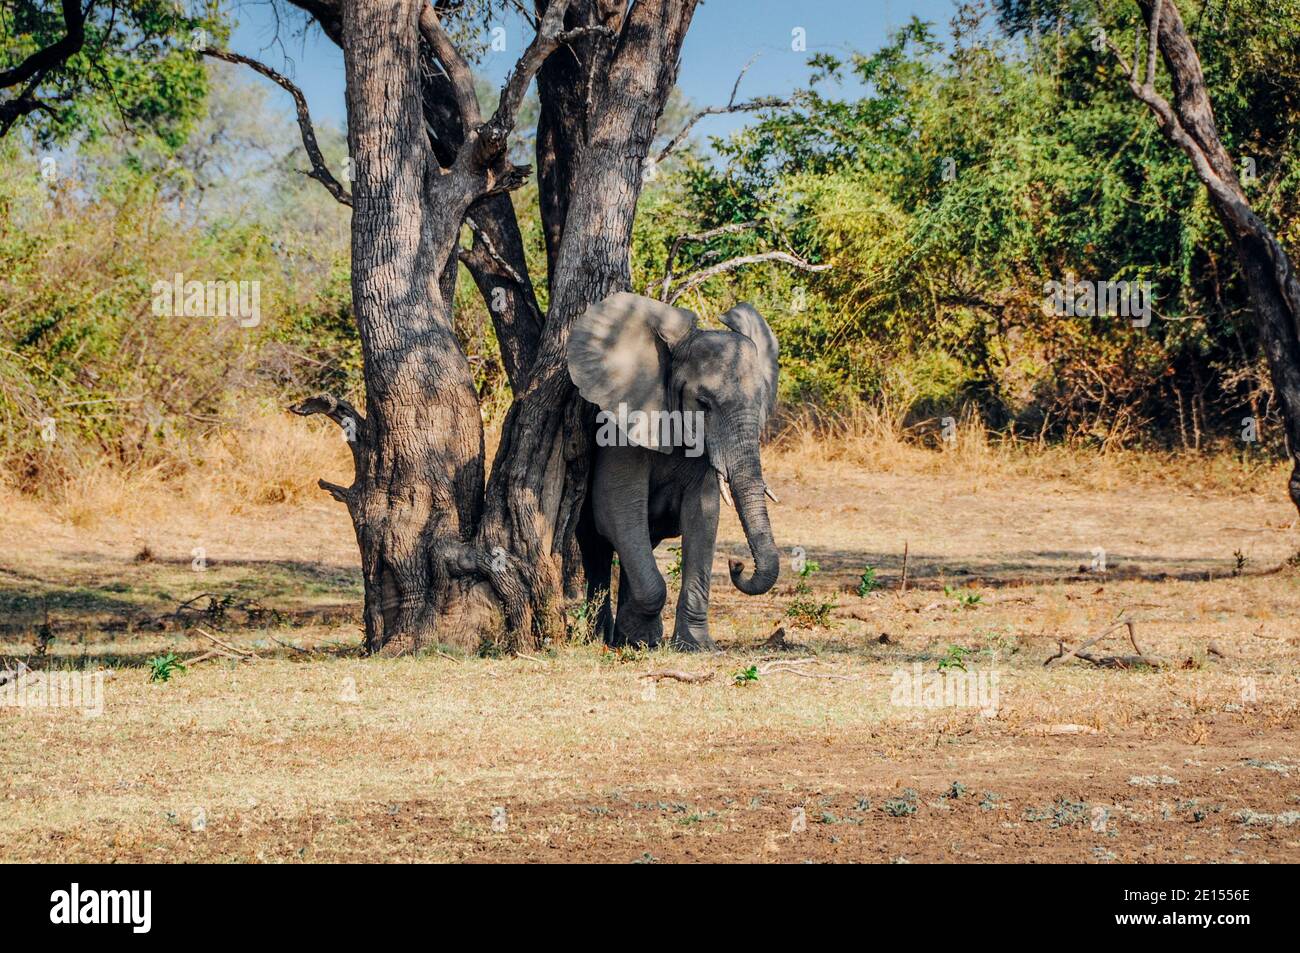 Elephant rubbing its skin against tree in South Luangwa National Park, Zambia, Africa Stock Photo